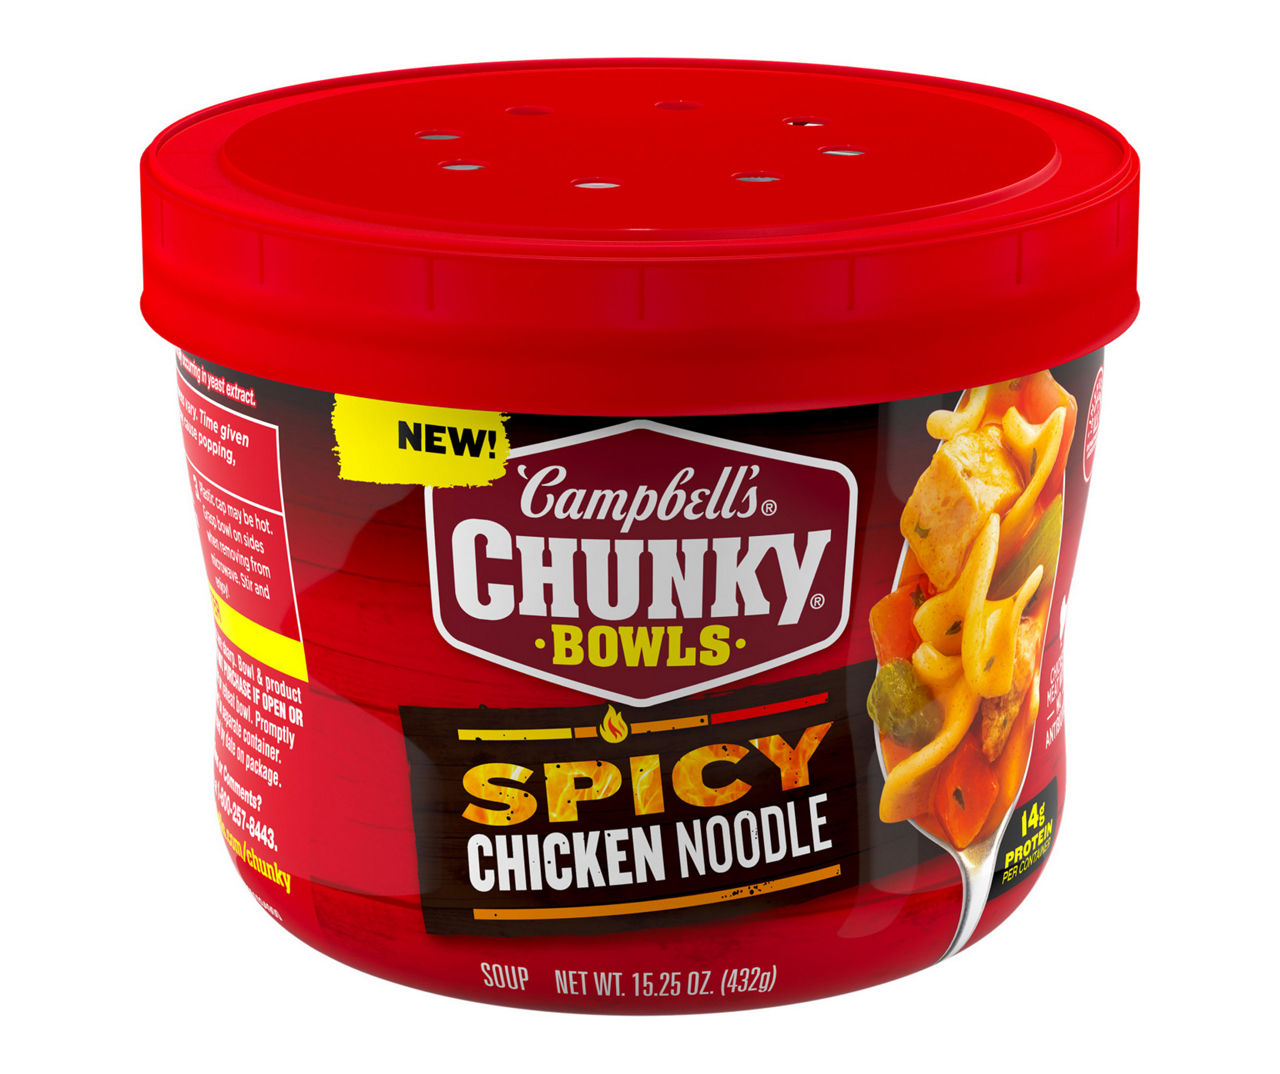 Spicy Chicken Noodle Microwavable Soup Bowl, 15.25 Oz.